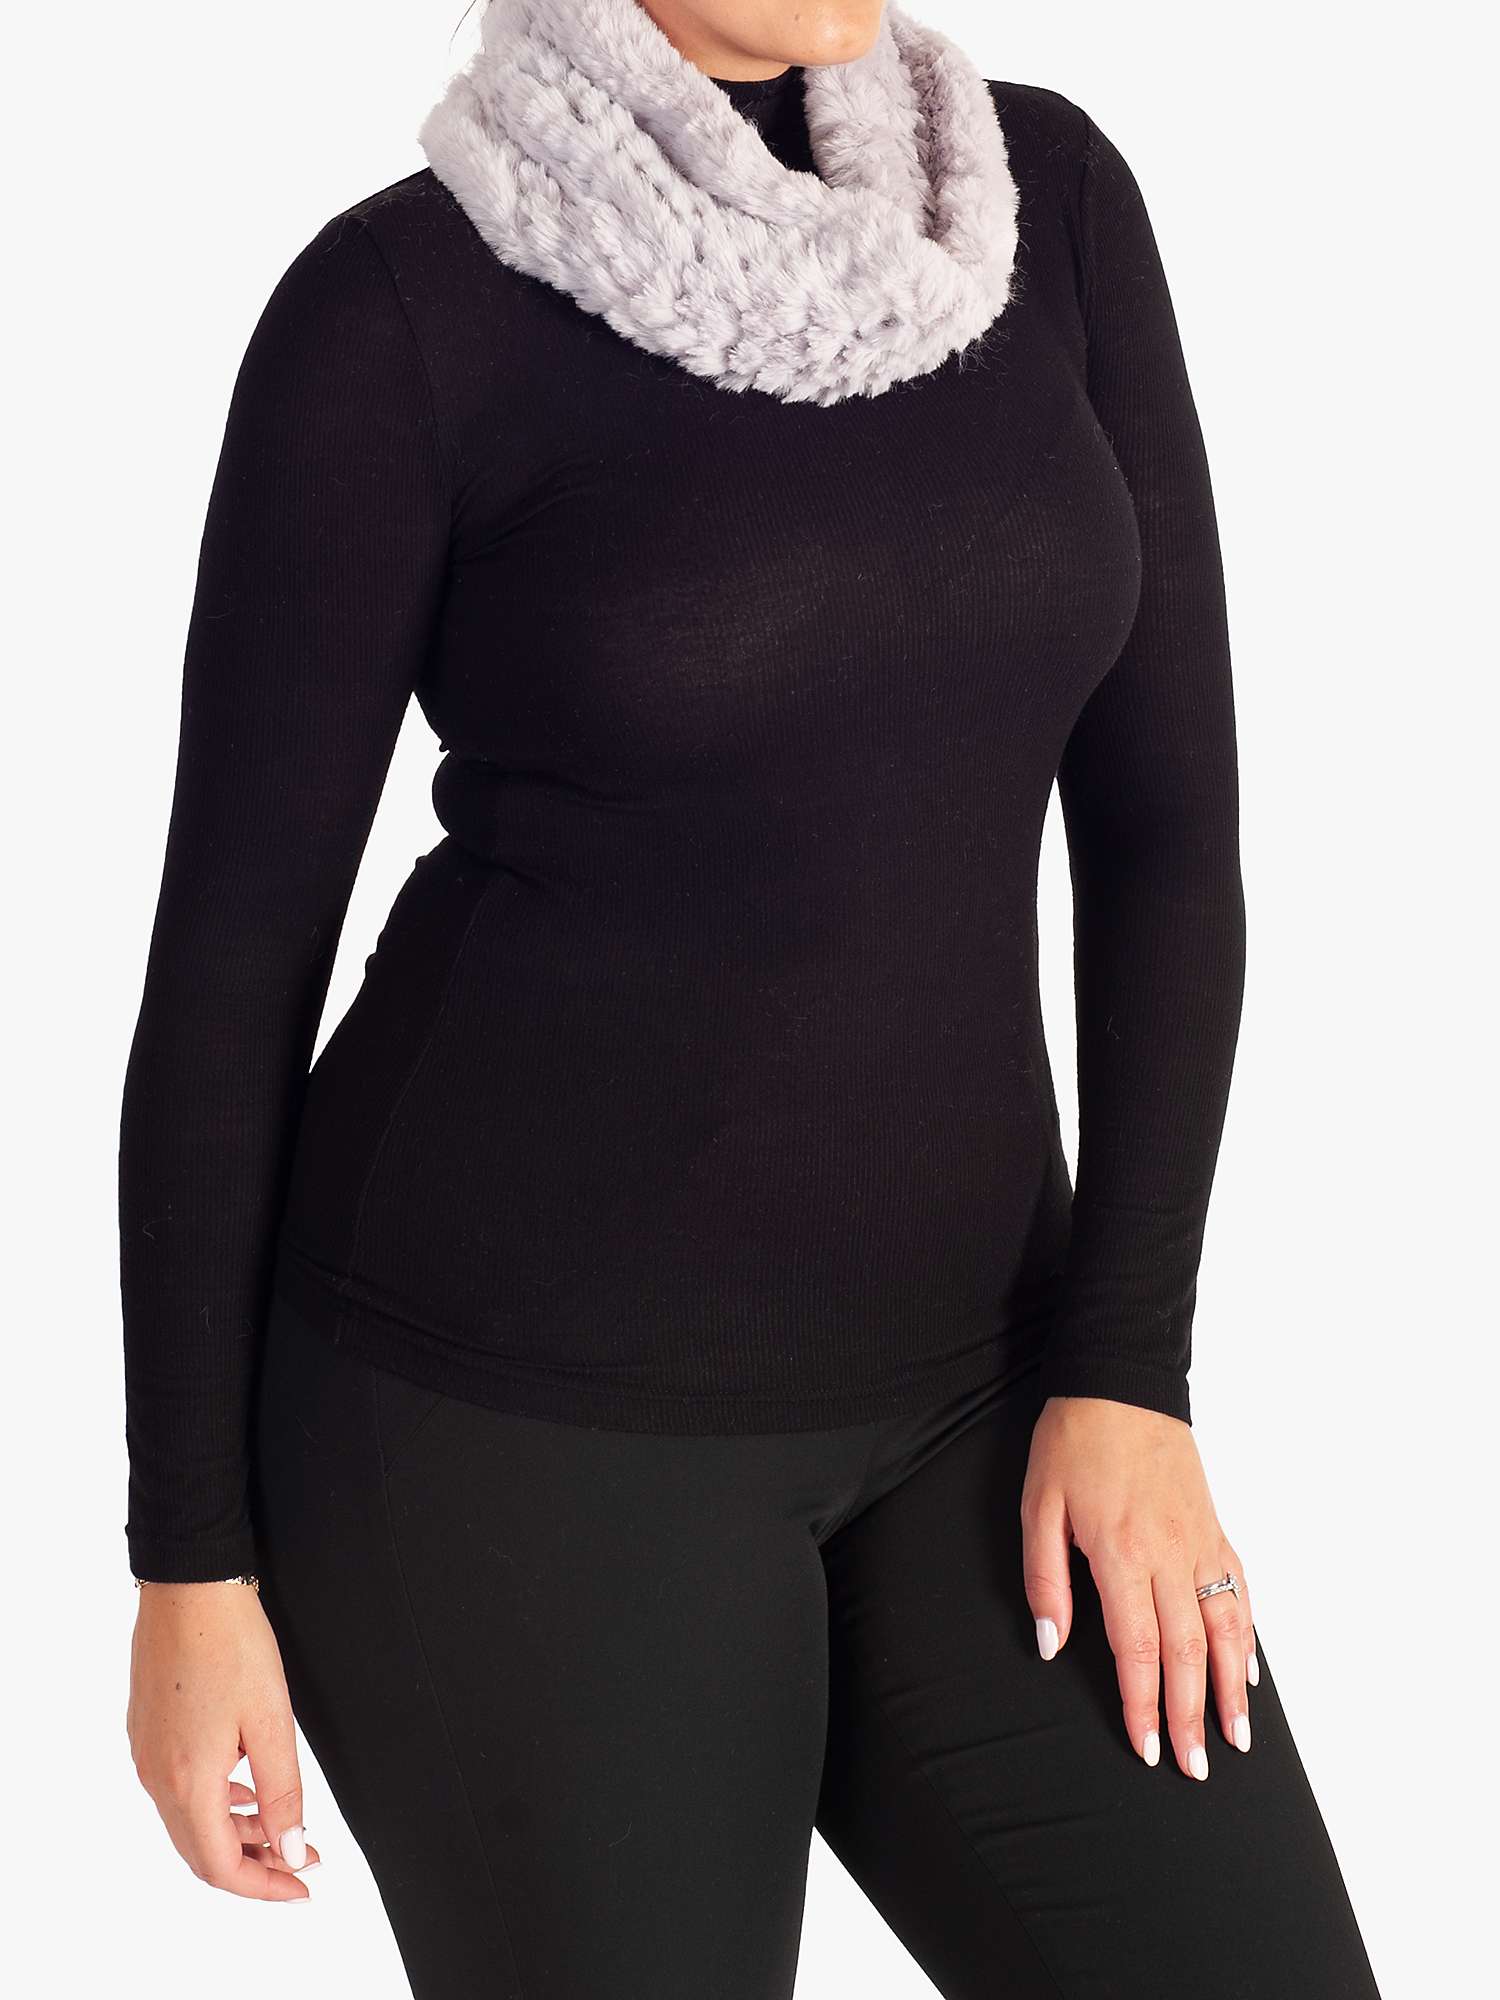 Buy chesca Faux Fur Snood Online at johnlewis.com